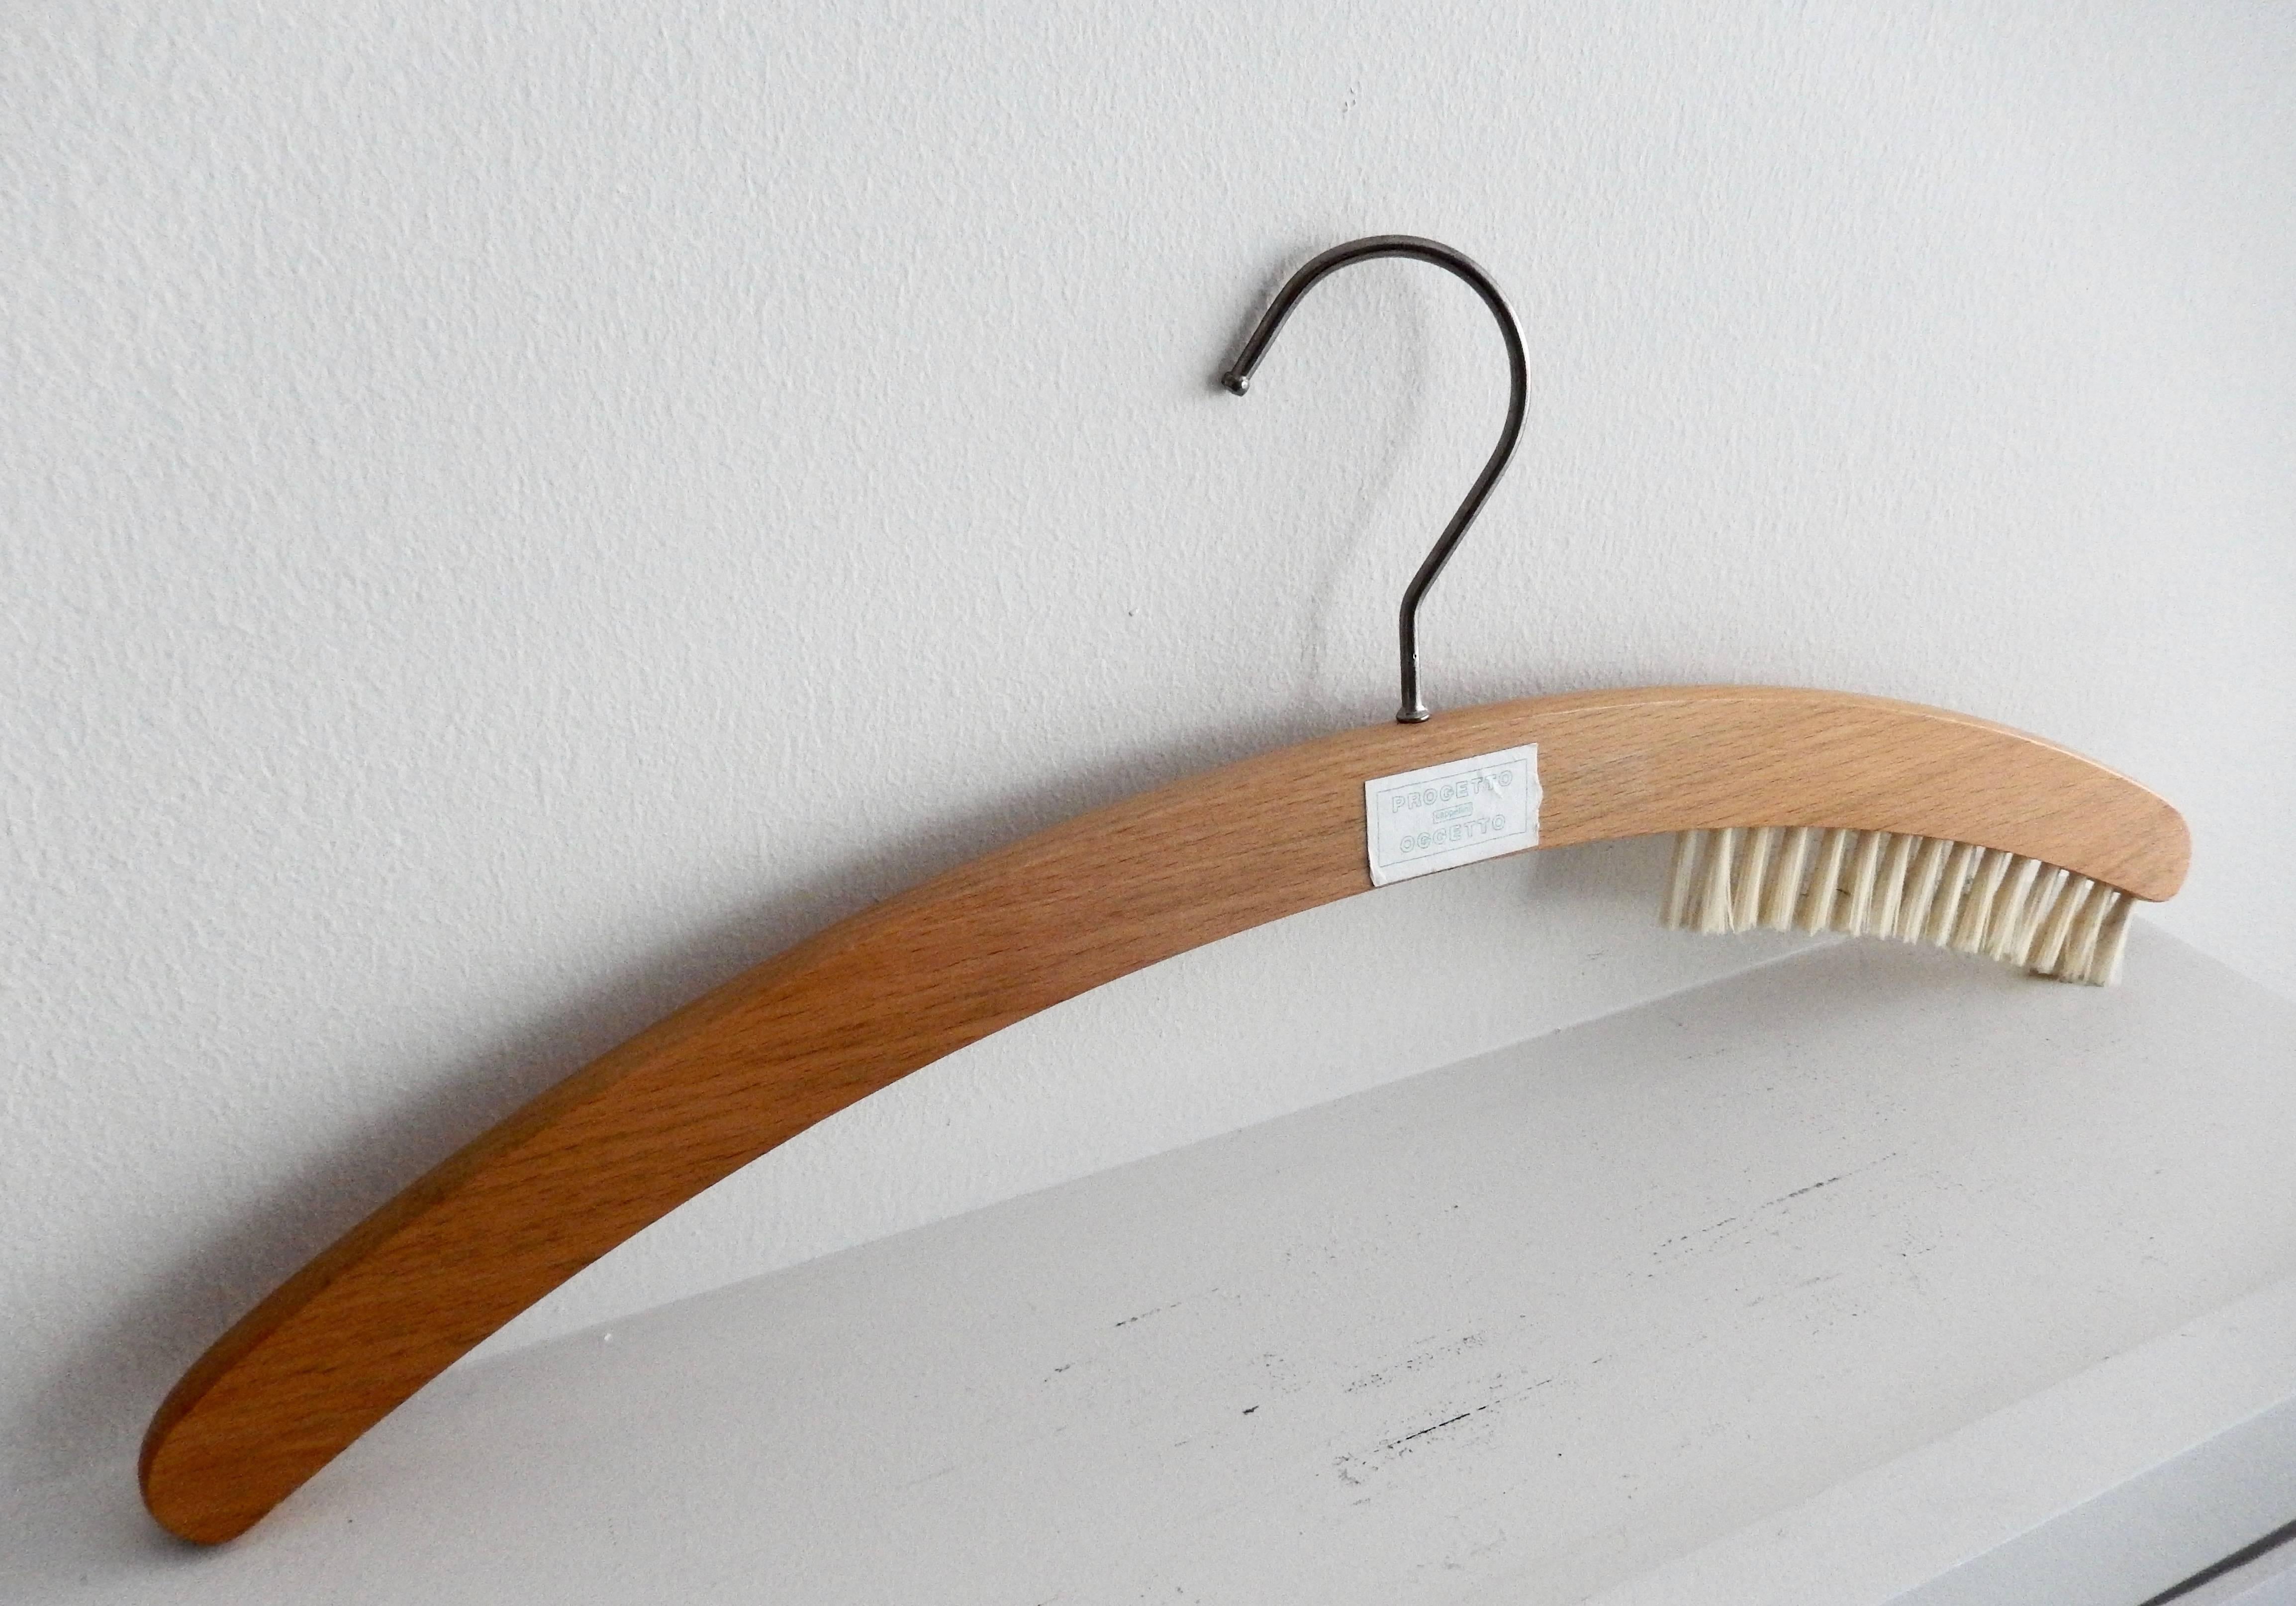 A witty, cleverly-designed clothes hanger by the influential industrial designer Konstantin Grcic (b.1965)  for Cappellini.  Original label.  Would be the prize accessory for an intelligent closet.

In 2014 the Vitra Design Museum in Germany had a